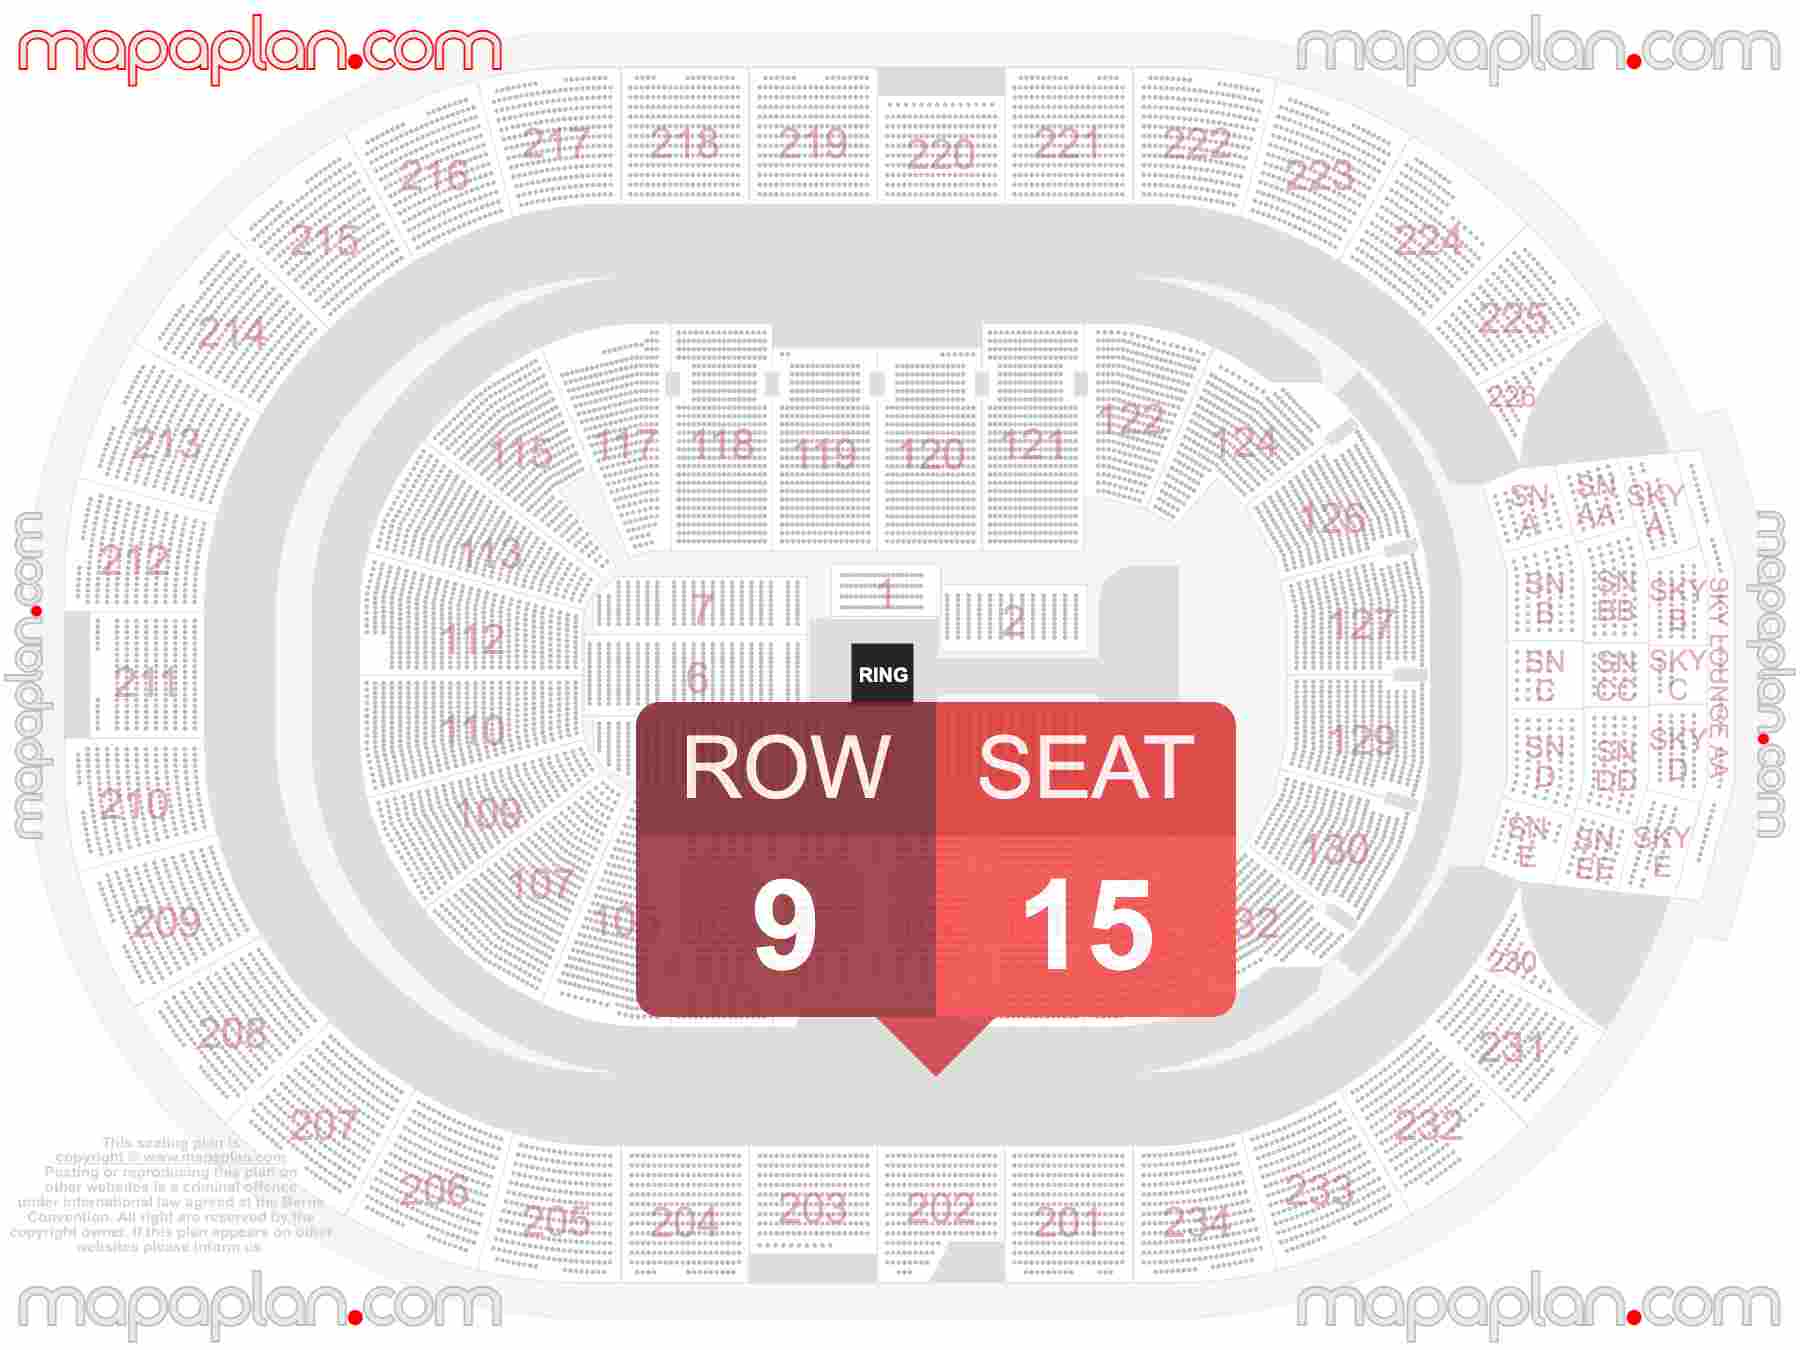 Edmonton Rogers Place seating map Concert with floor general admission PIT standing room only detailed seating map - 3d virtual seat numbers and row layout